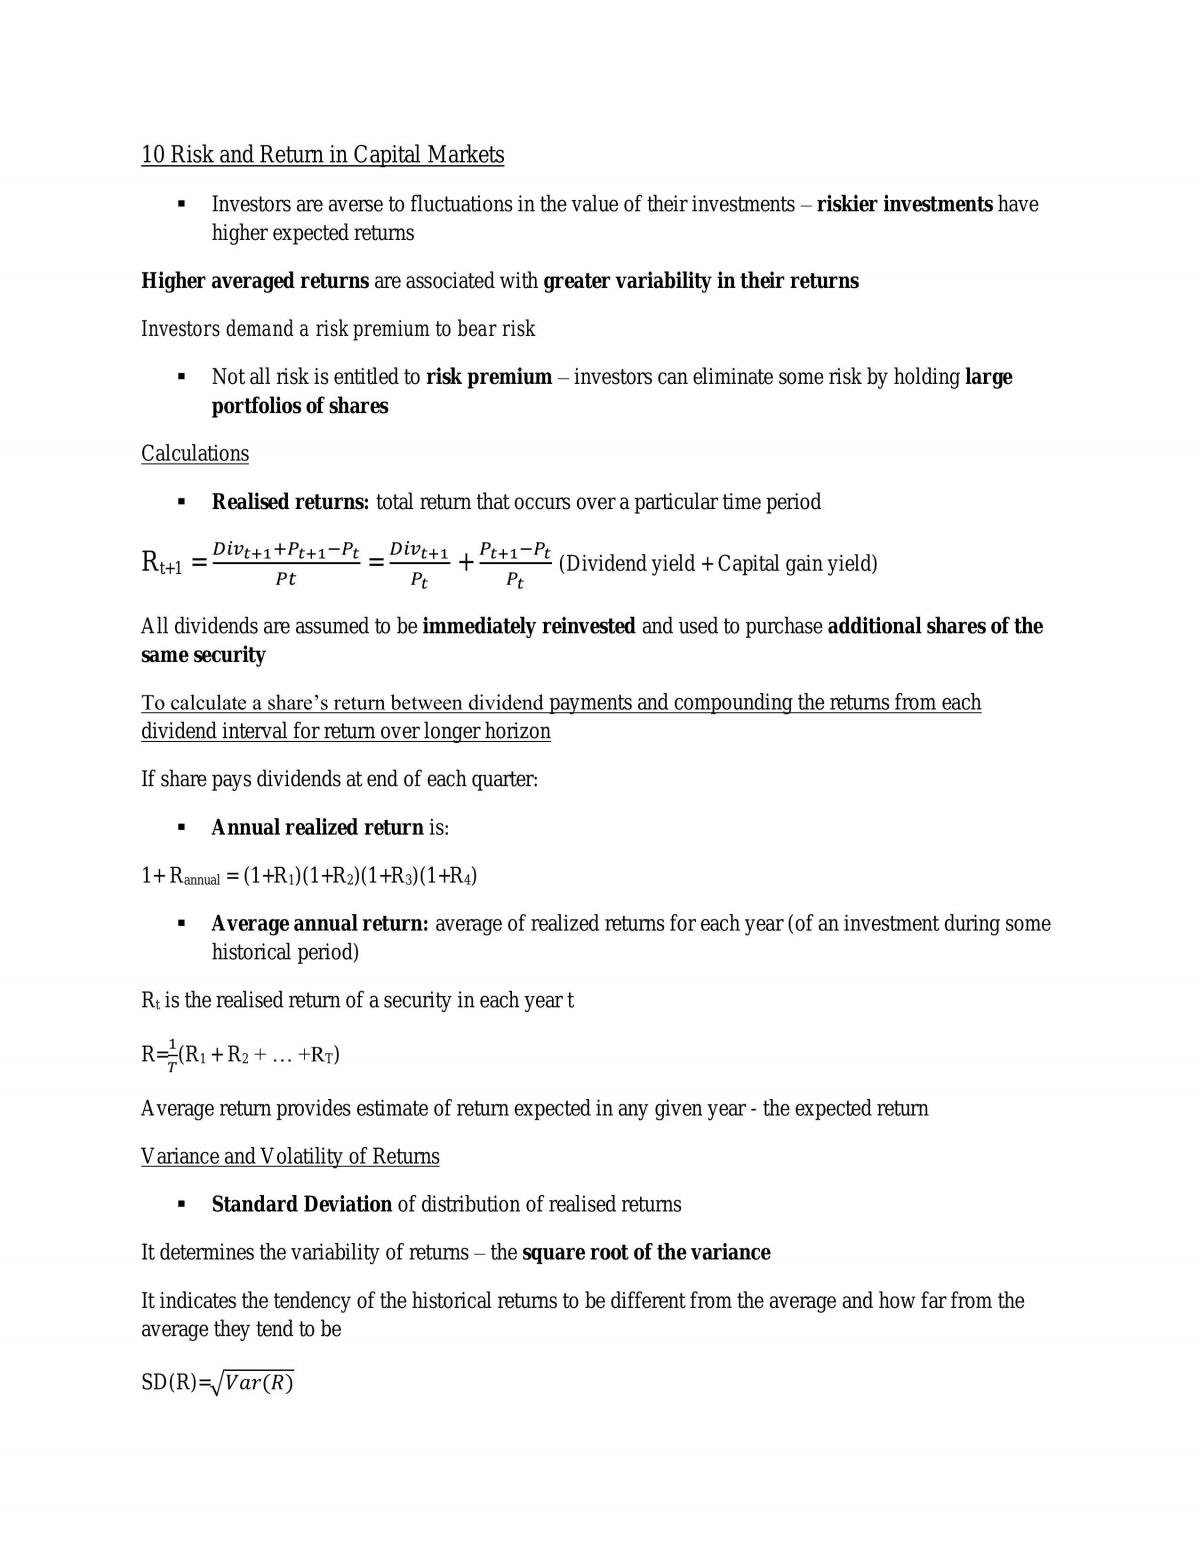 Risk and Return in Capital Markets Notes - Page 1